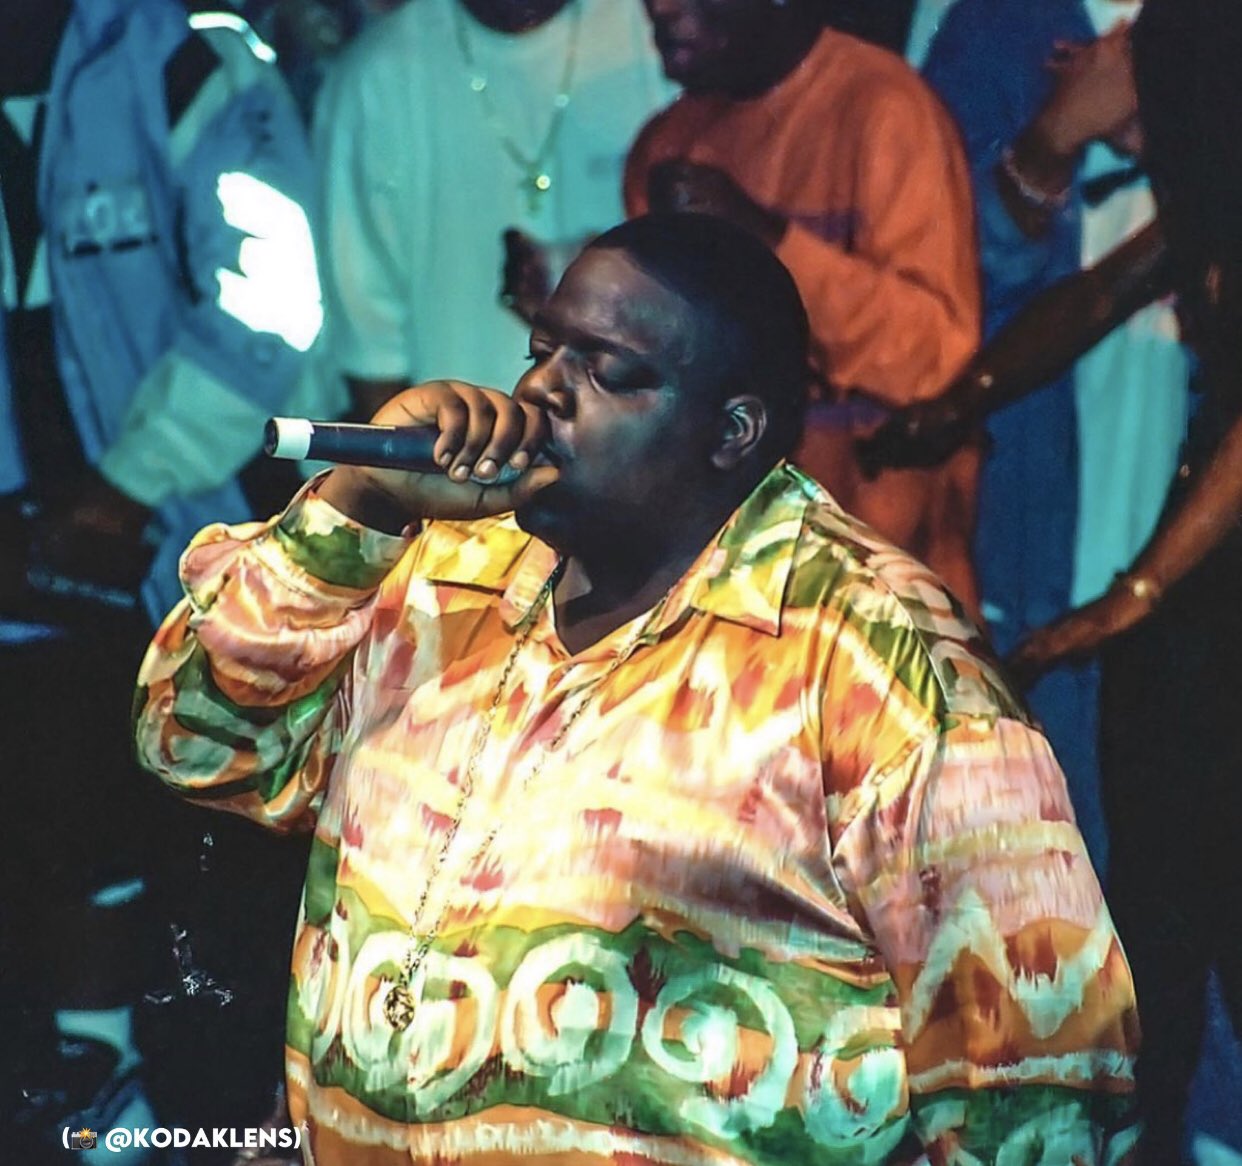 49 years ago today, The Notorious B.I.G. was born. 

Happy Birthday Biggie & Rest in peace   